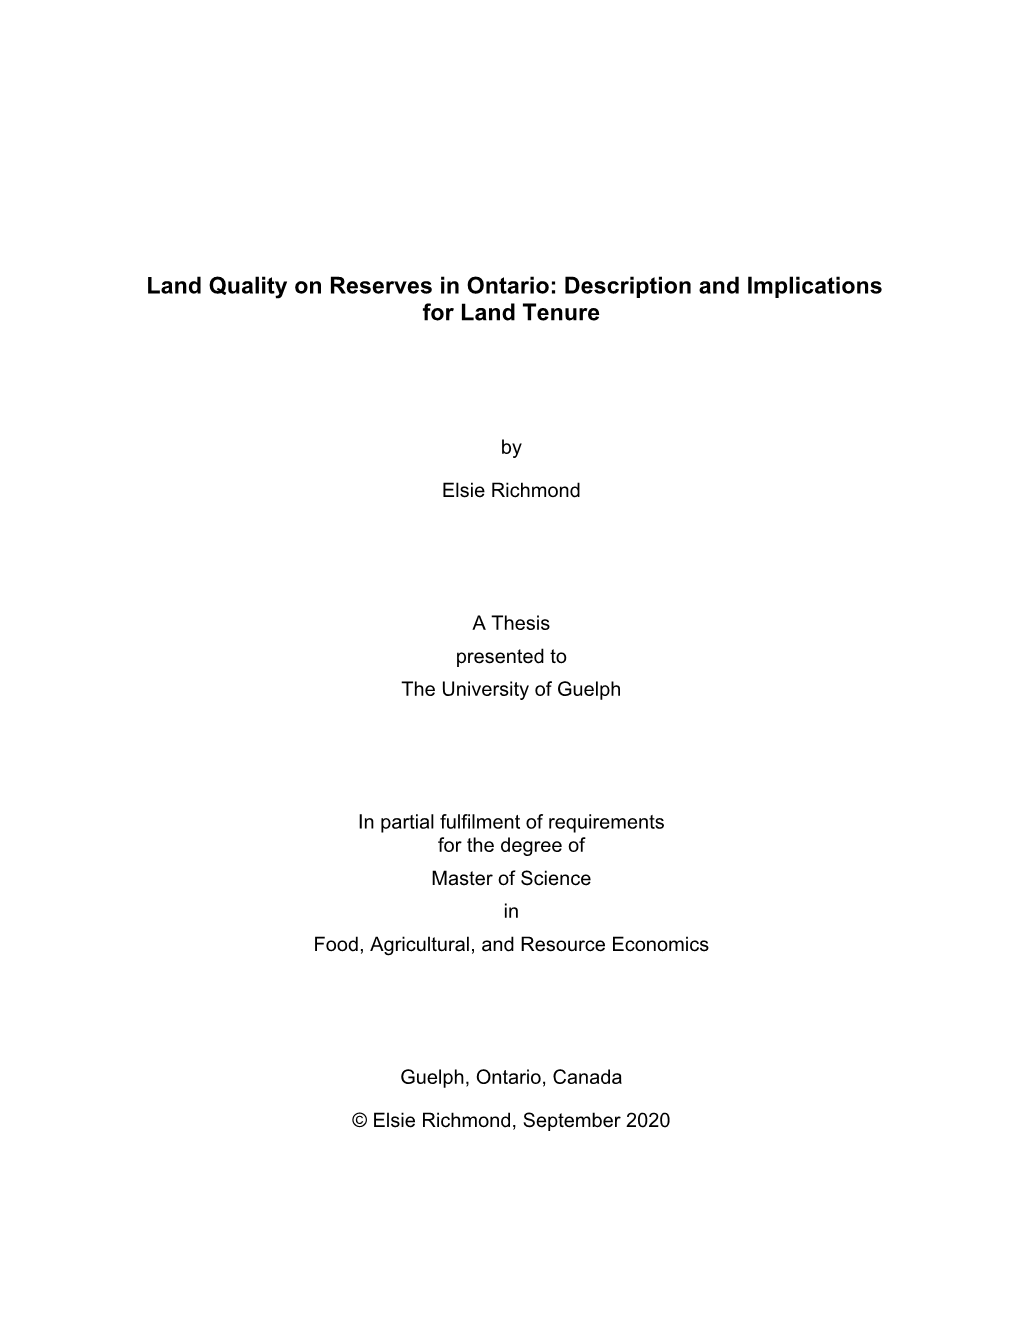 Land Quality on Reserves in Ontario: Description and Implications for Land Tenure